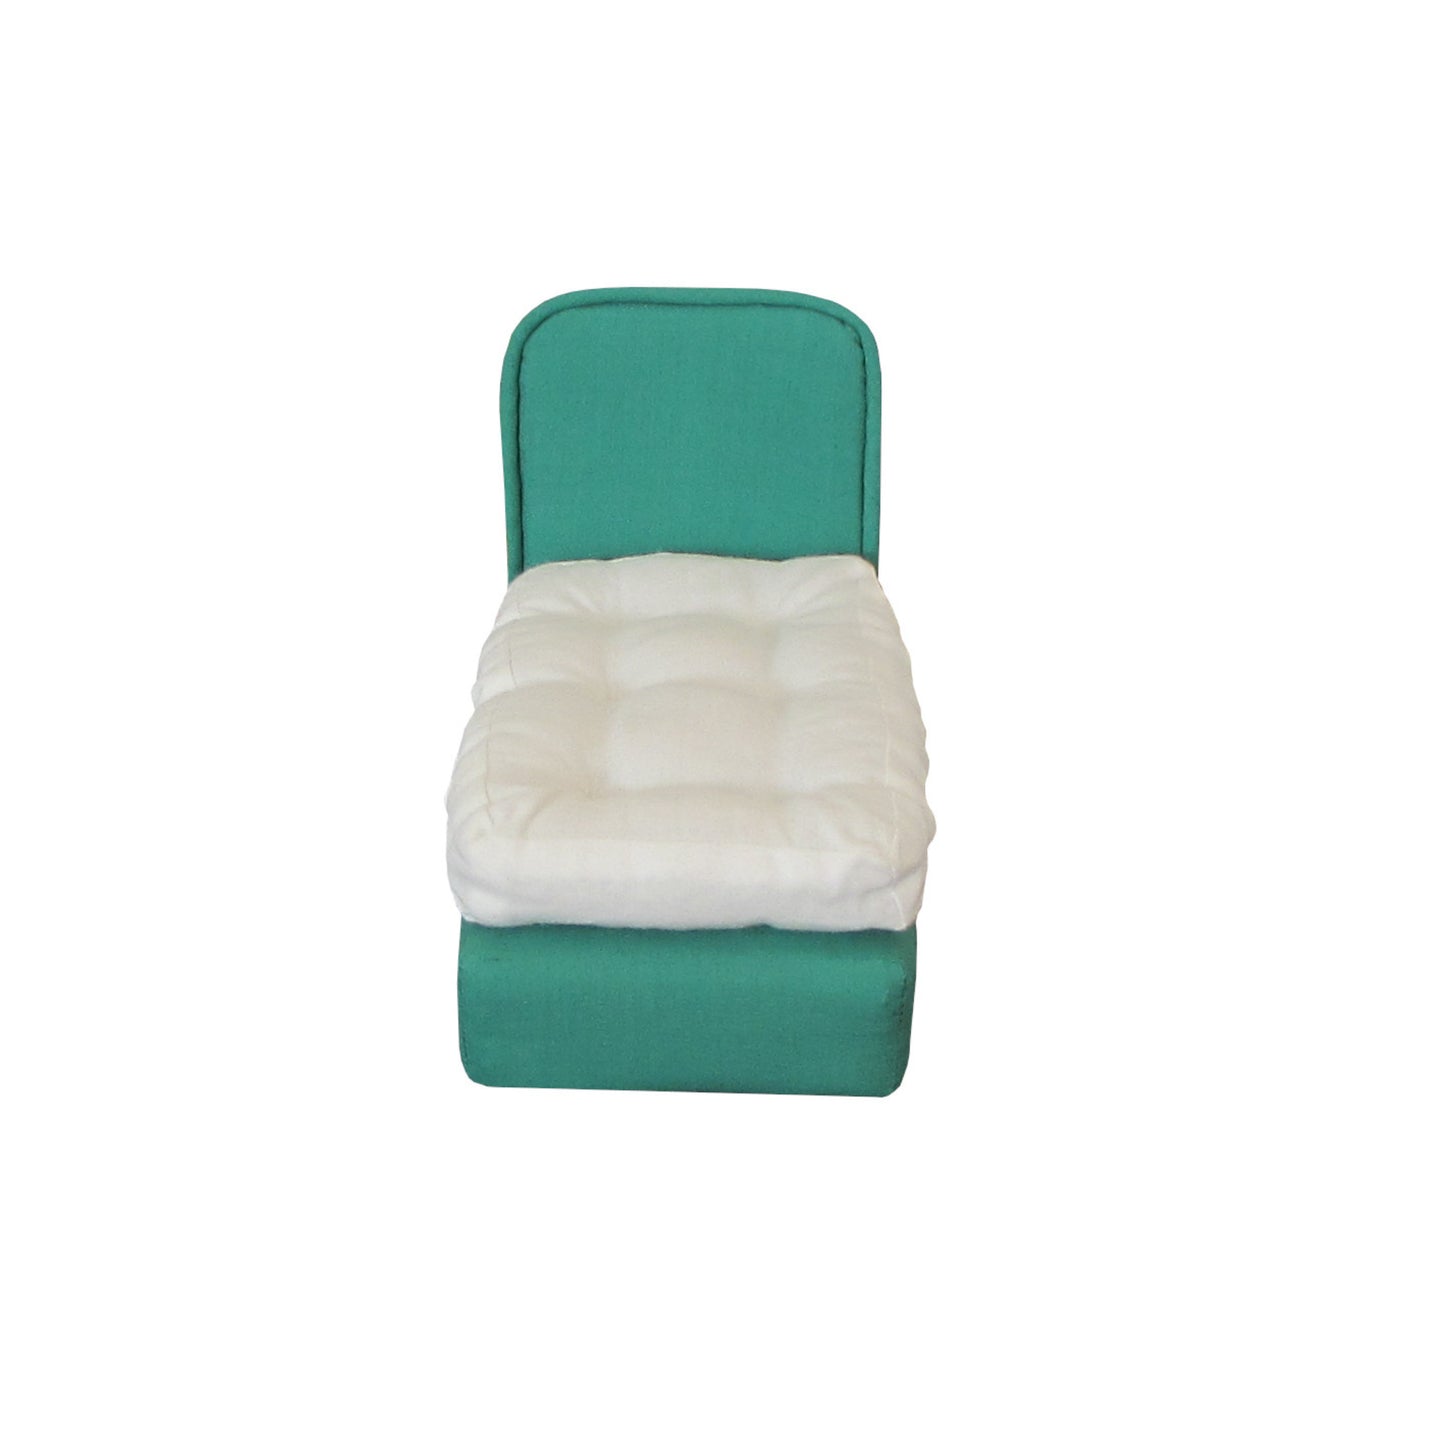 Upholstered Kelly Green Doll Bed for 6.5-inch dolls Second view